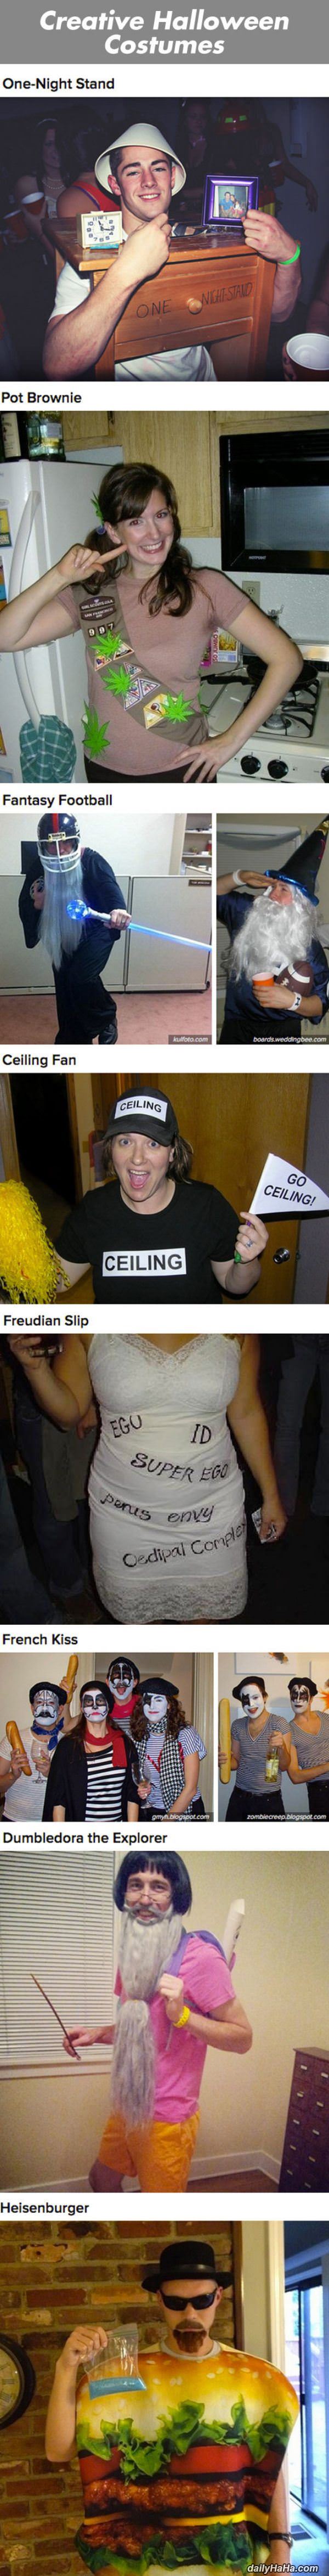 creative-halloween-costumes funny picture